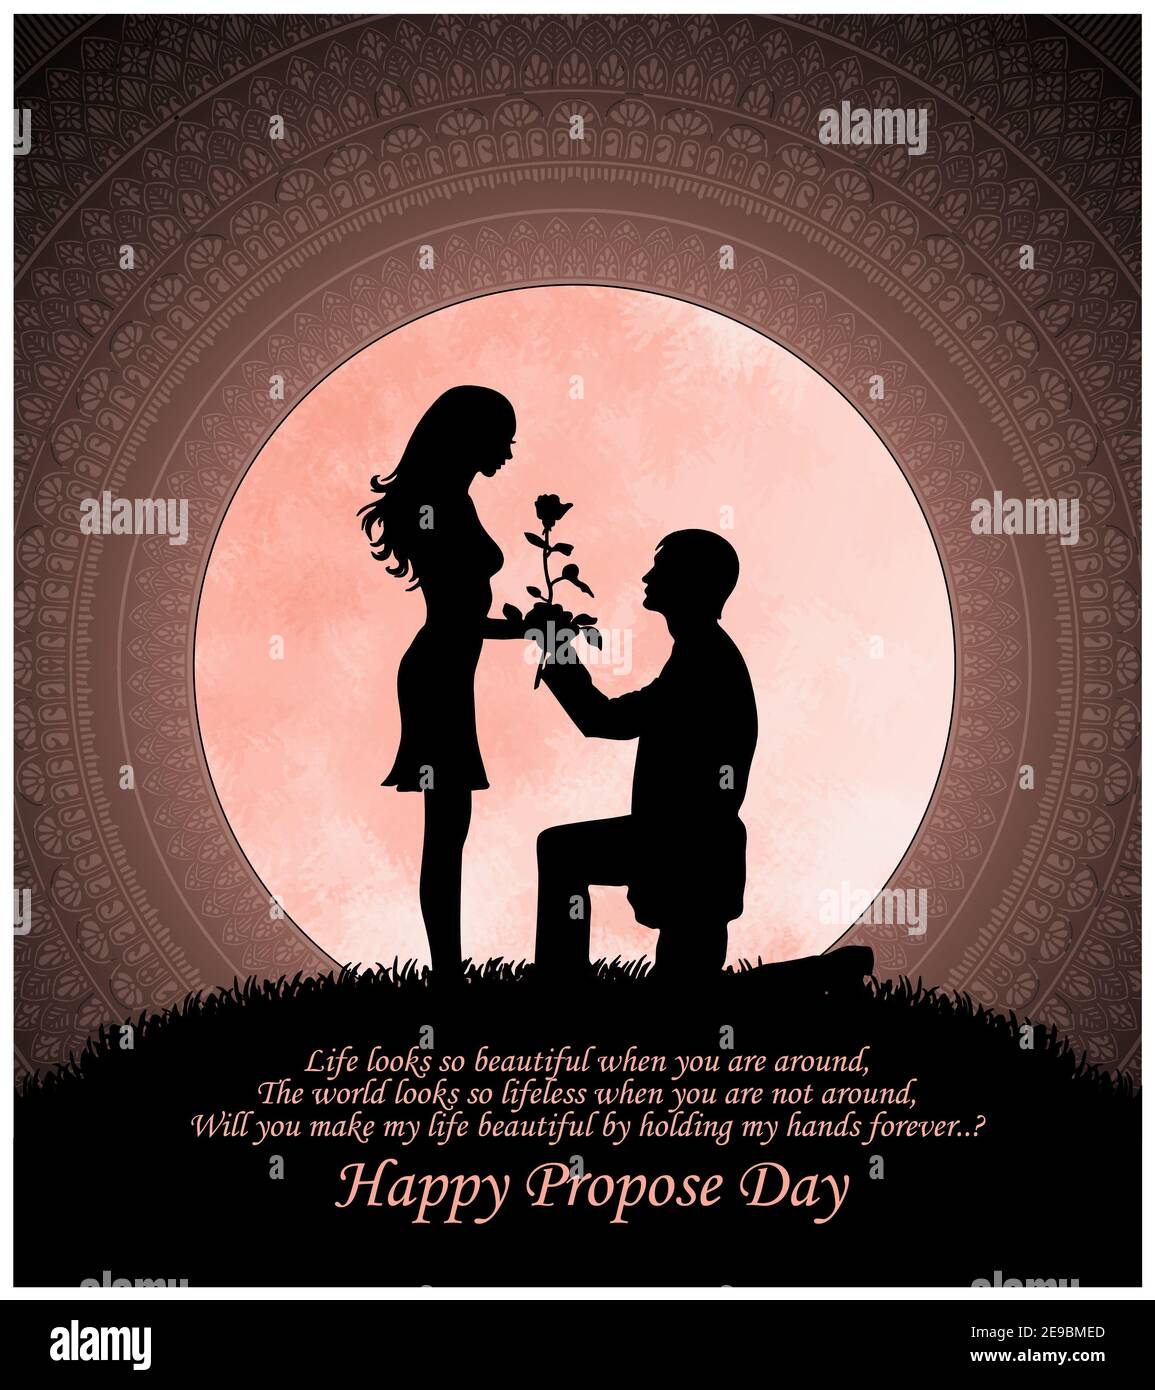 Young Man Proposing His Girlfriend on Propose Day during Valentine Week.  Beautiful Romantic Background of Lovable Couple Stock Illustration -  Illustration of happiness, engagement: 240950319